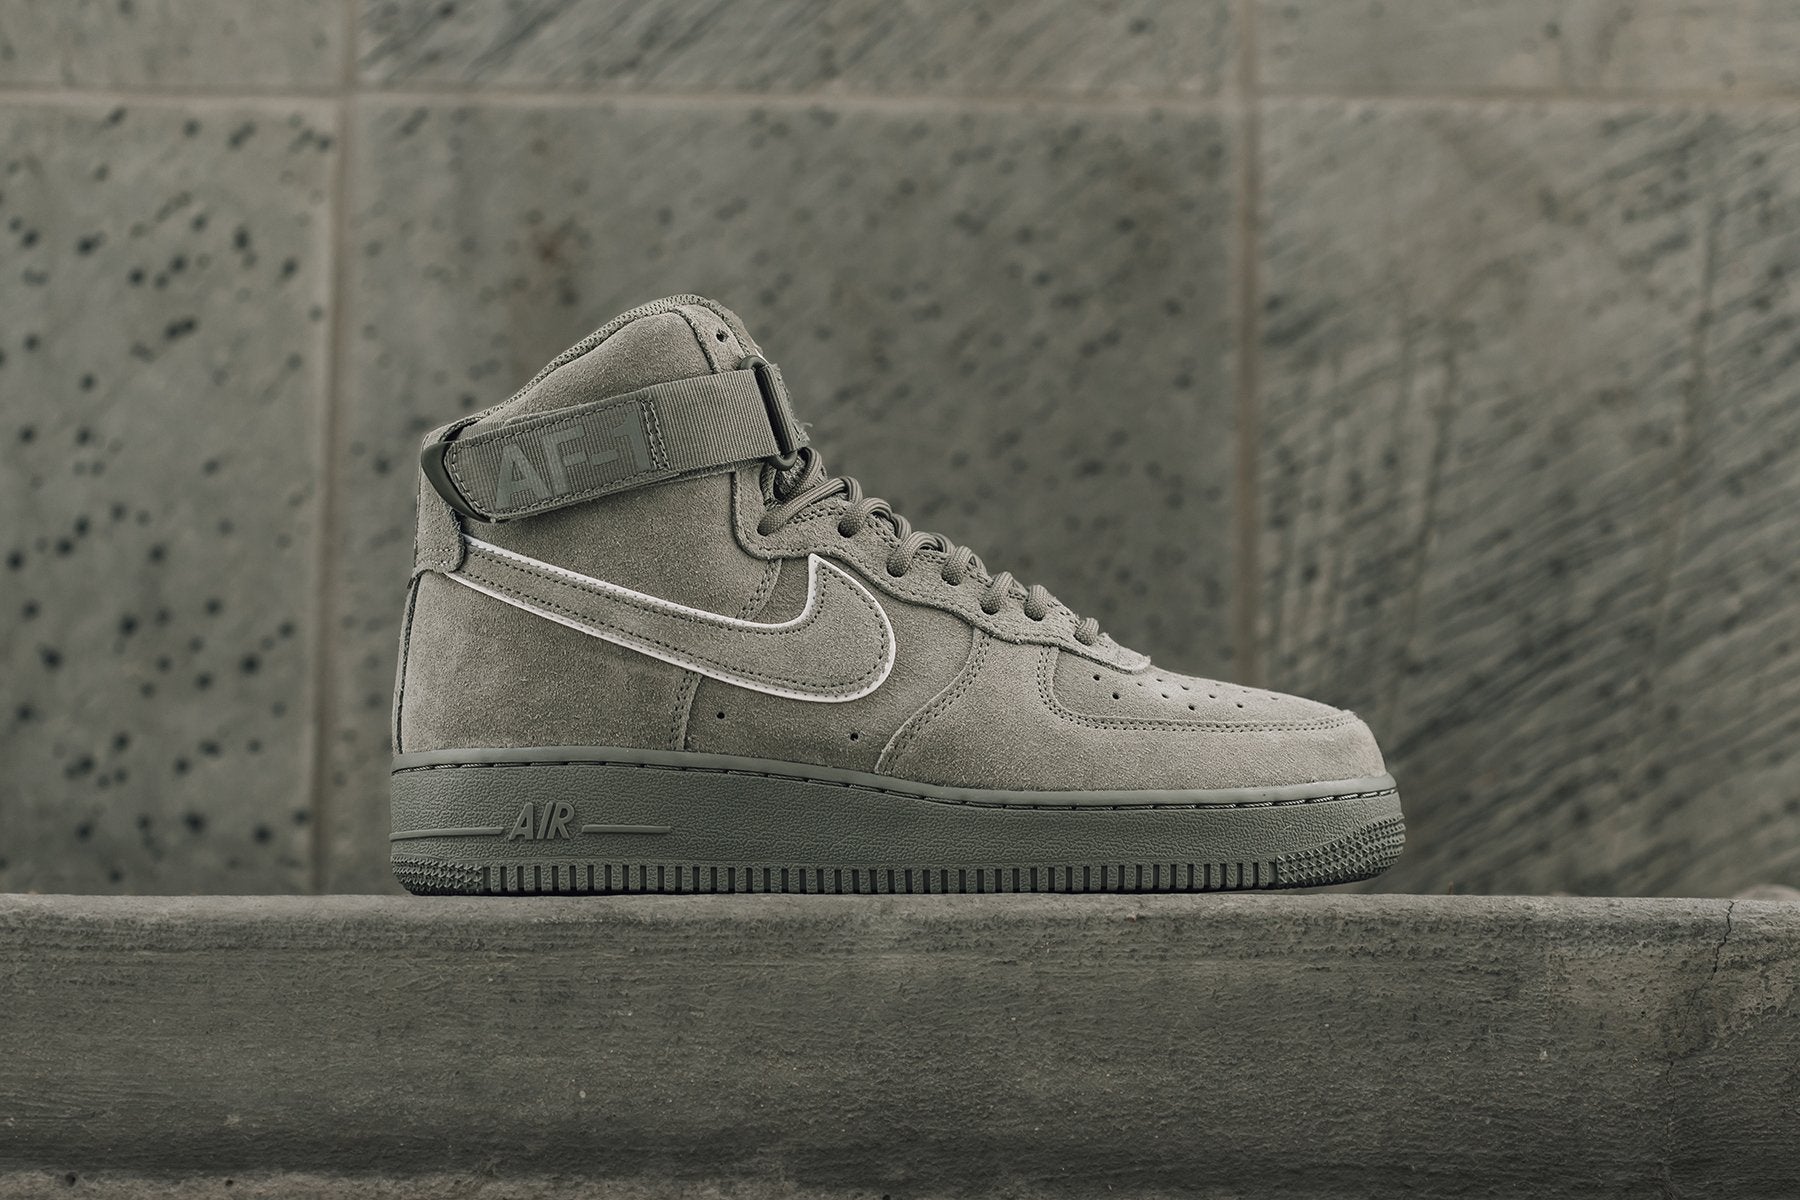 levenslang Hedendaags Oprichter Nike Air Force 1 High '07 LV8 "Dark Stucco" Available Now – Feature